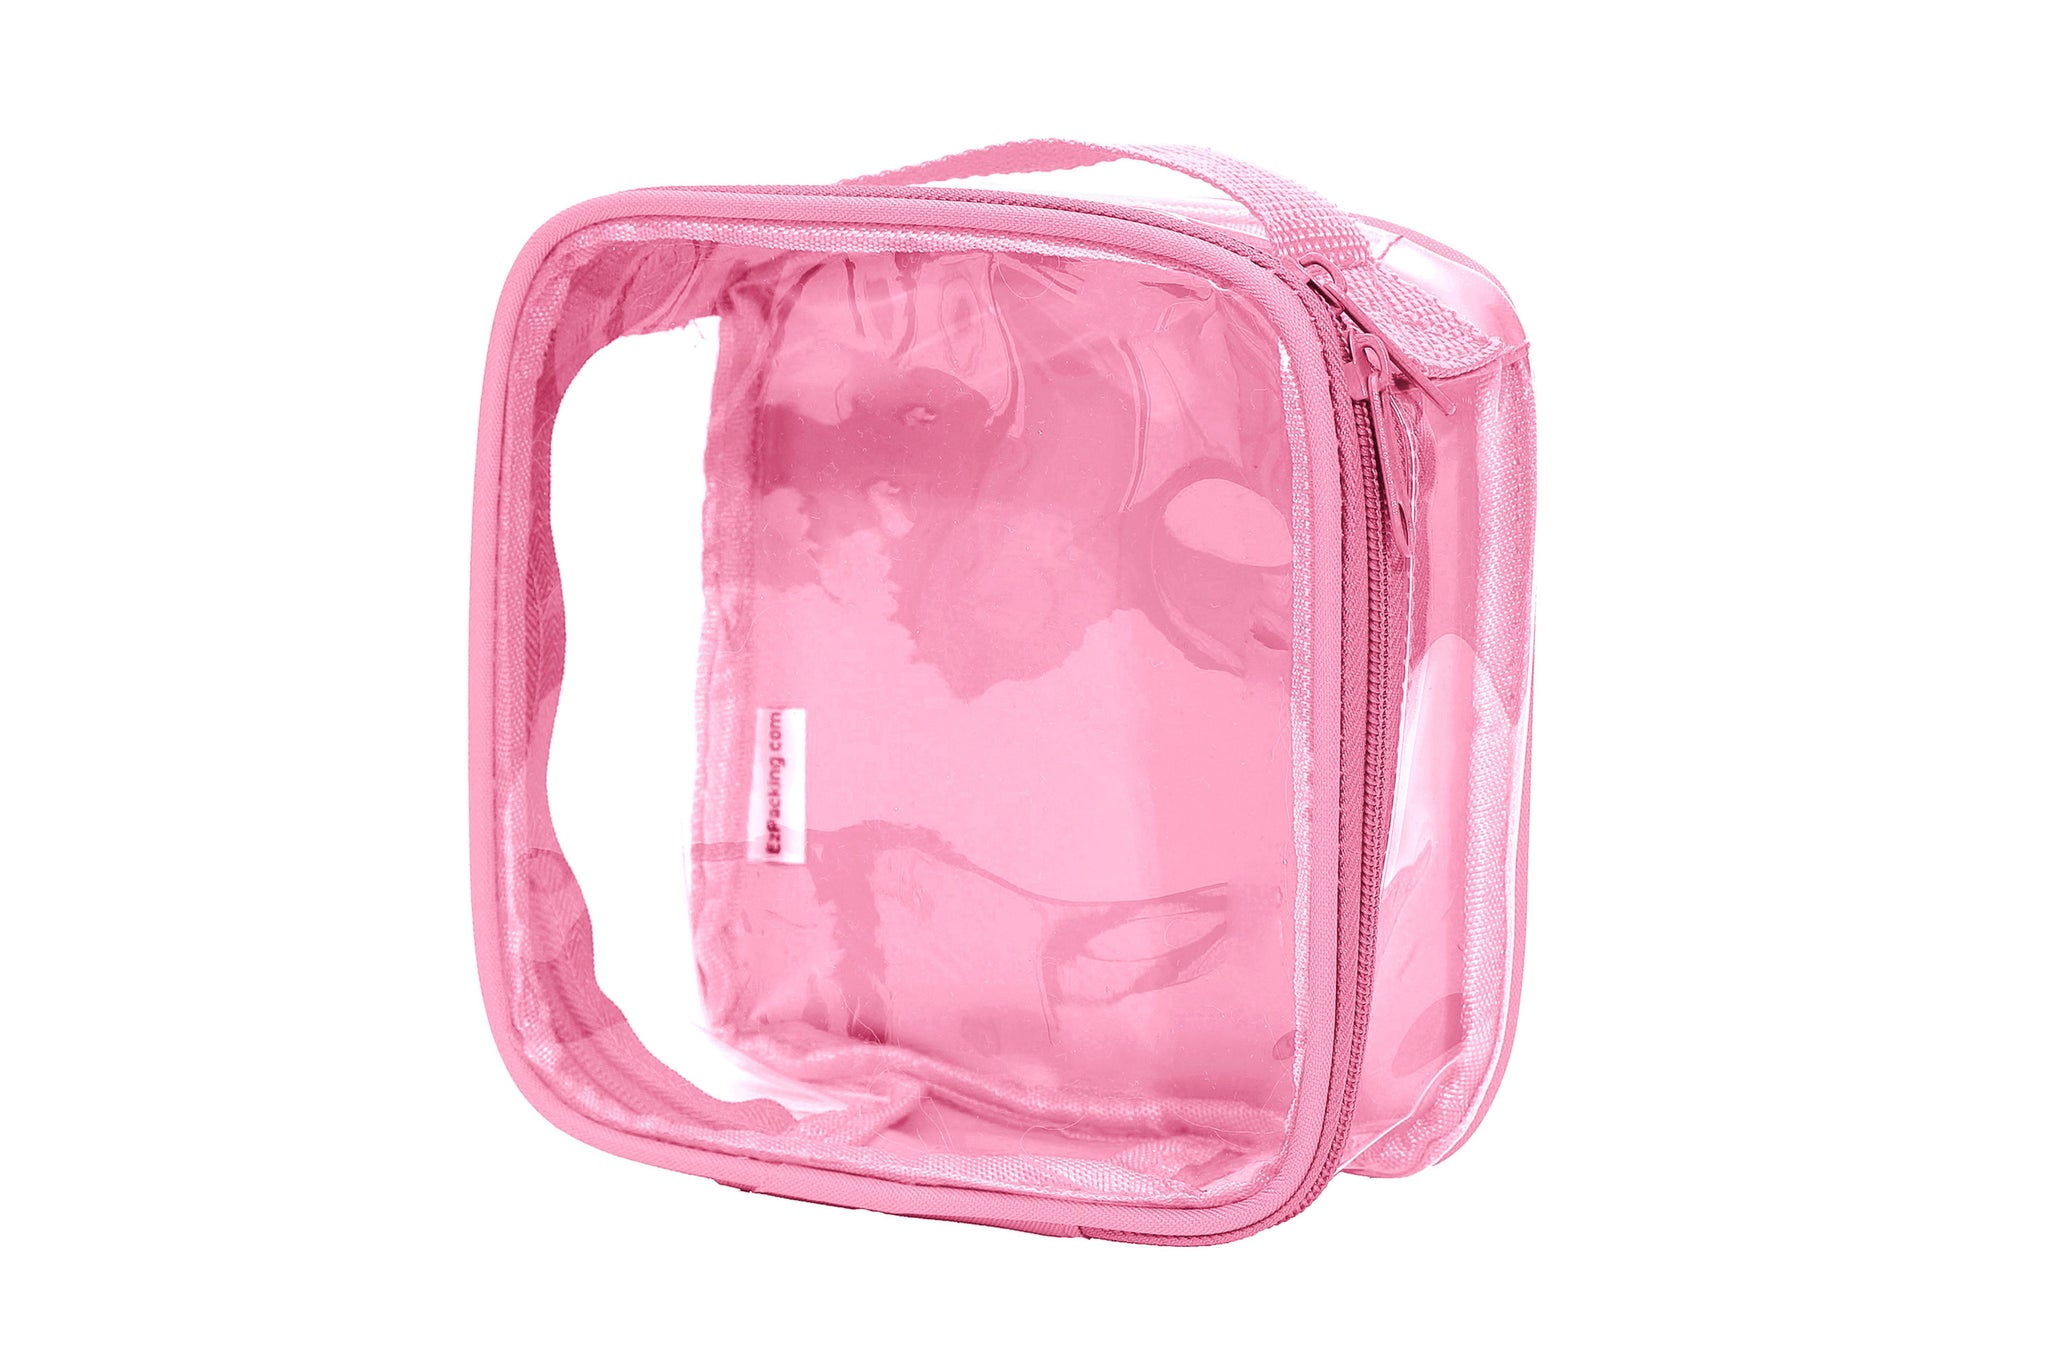 TSA Approved Clear Travel Toiletry Bag-Quart Sized with Zipper